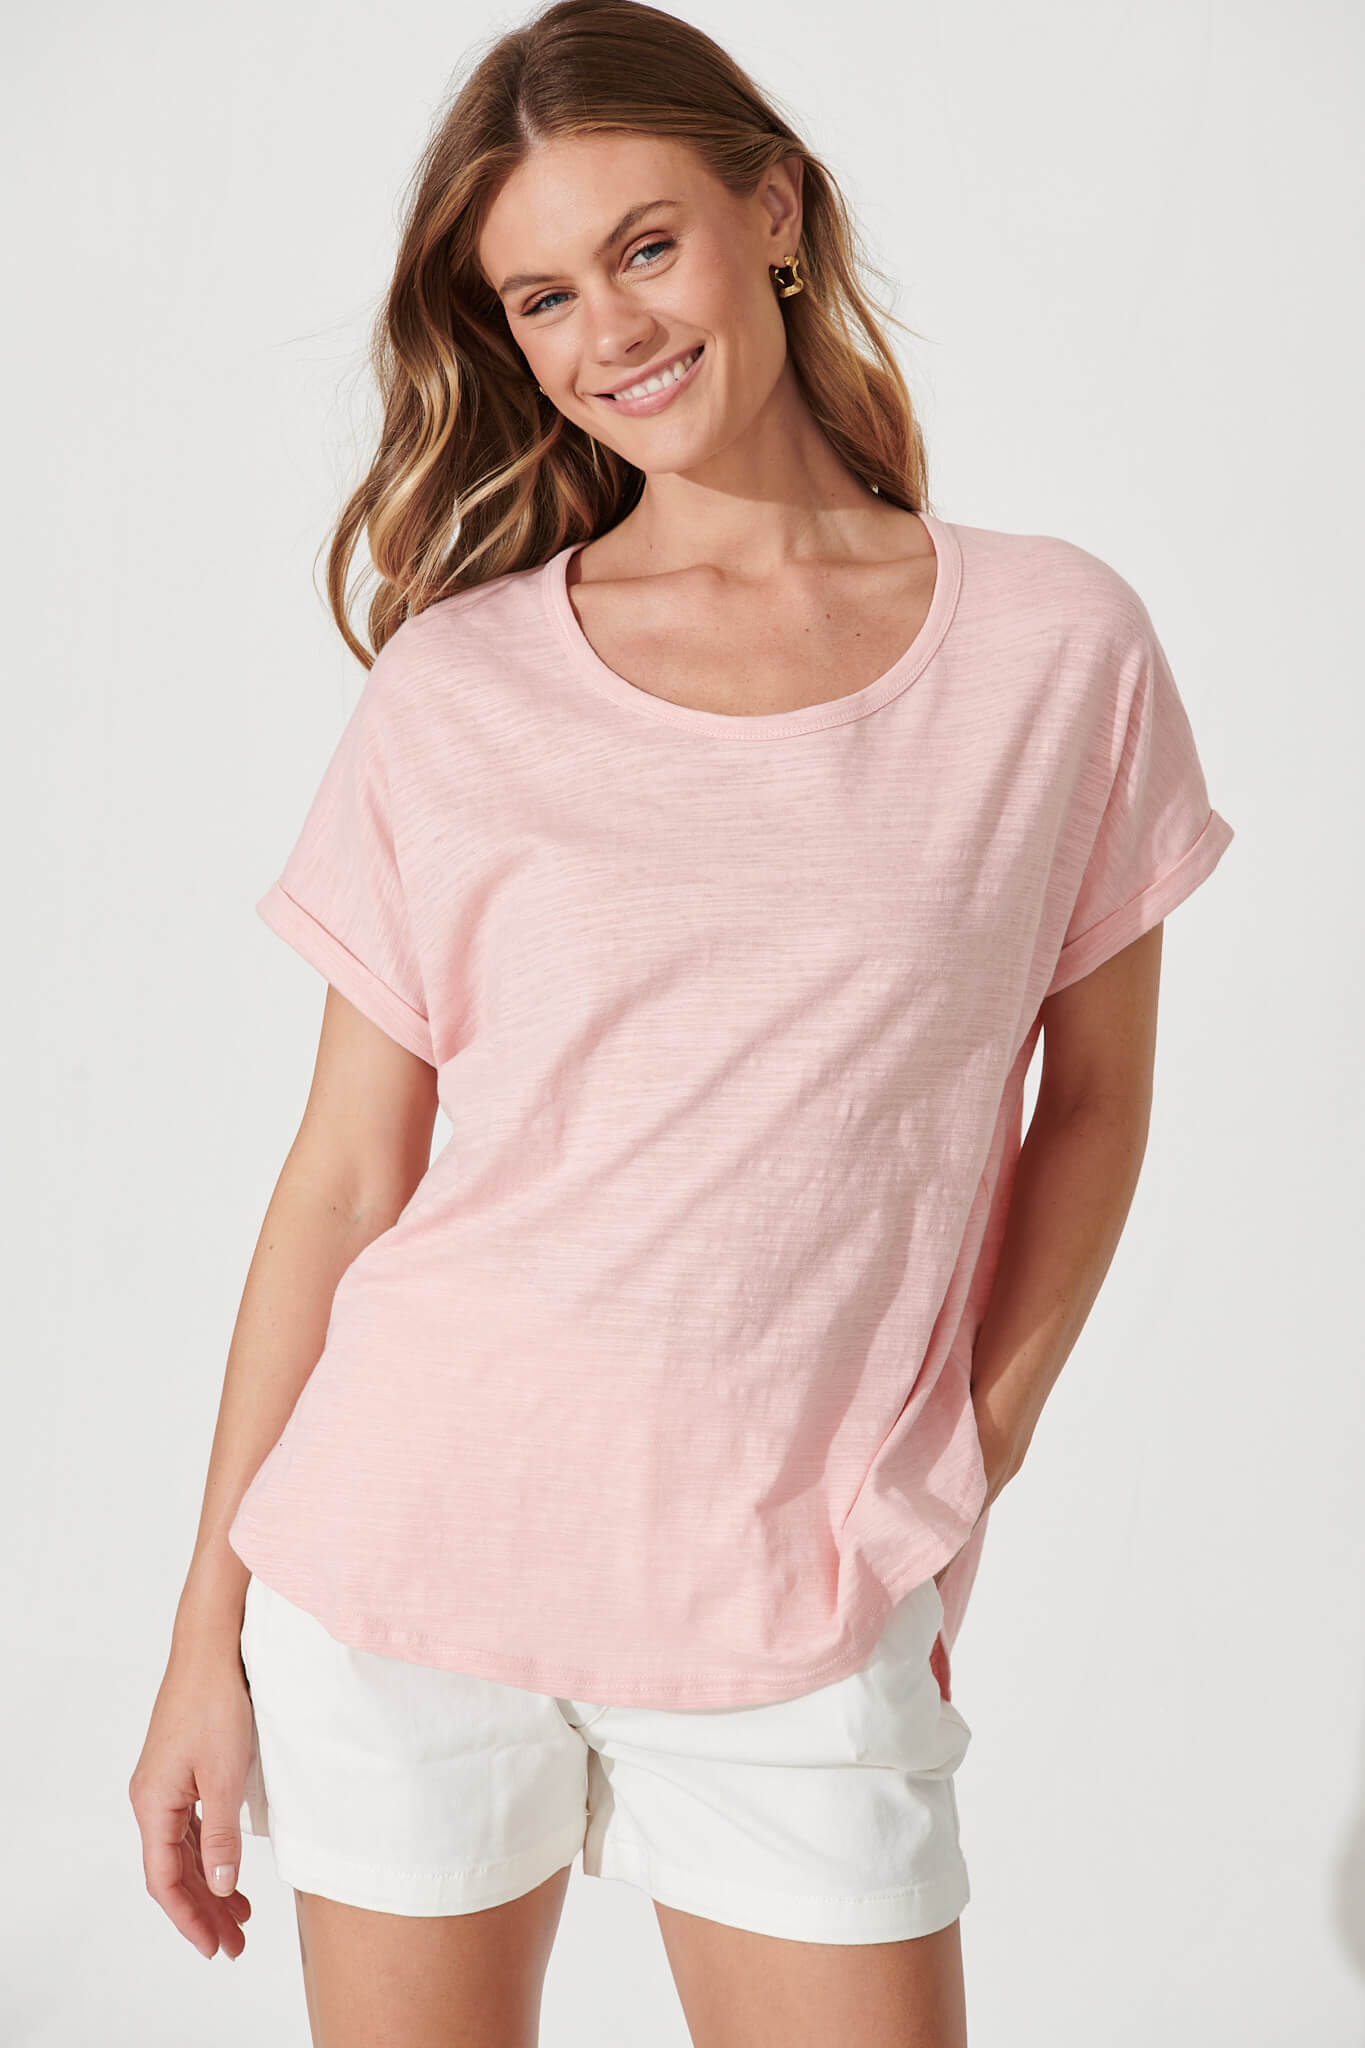 Lois Tshirt In Blush Cotton - front